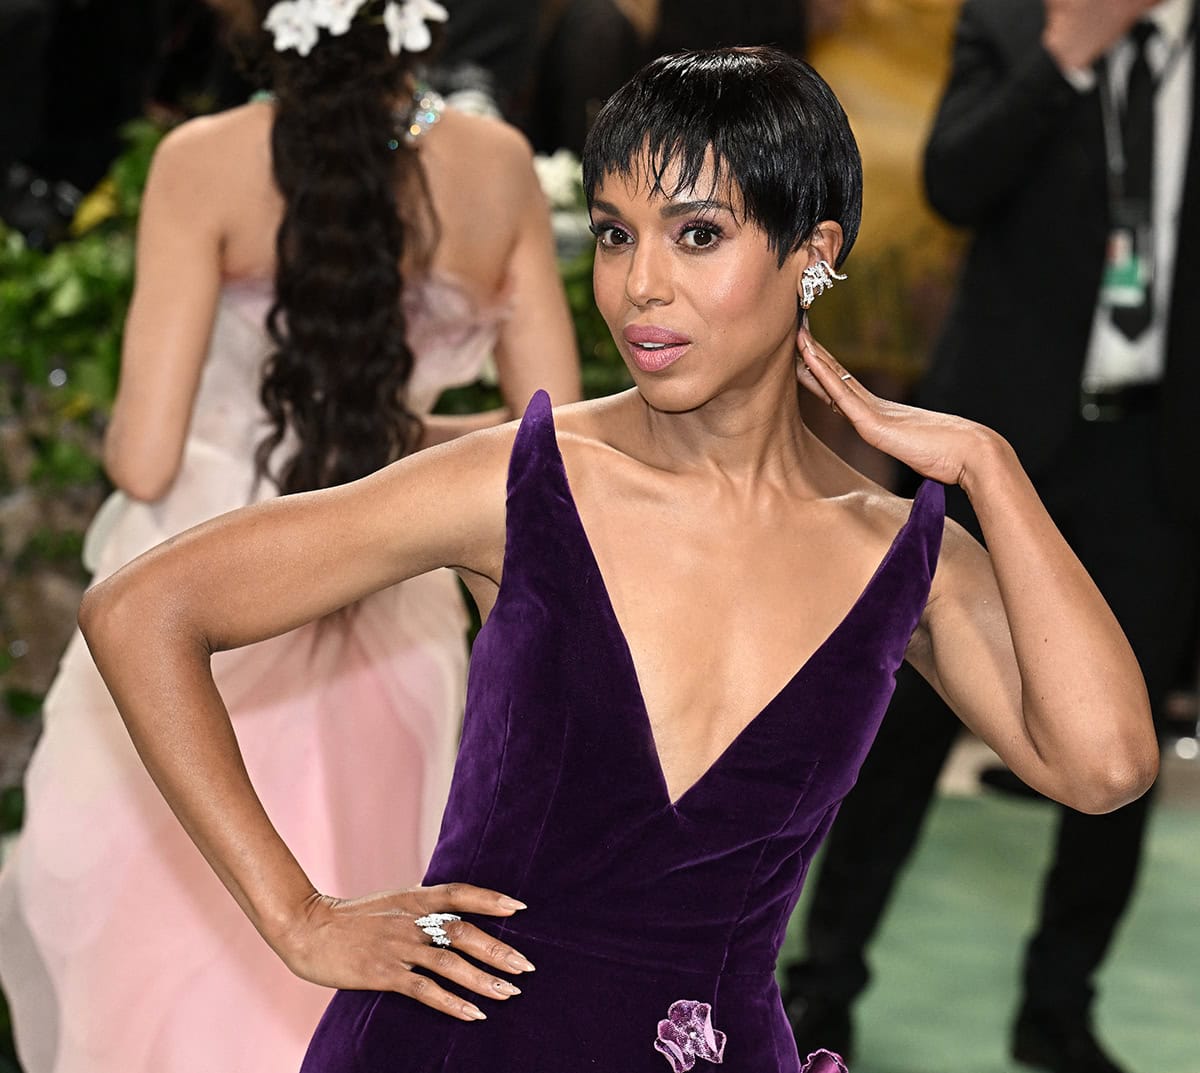 Kerry Washington styles her purple gown with diamond jewelry by Yeprem and wears mauve eyeshadow and a wet-look pixie hairstyle with baby bangs